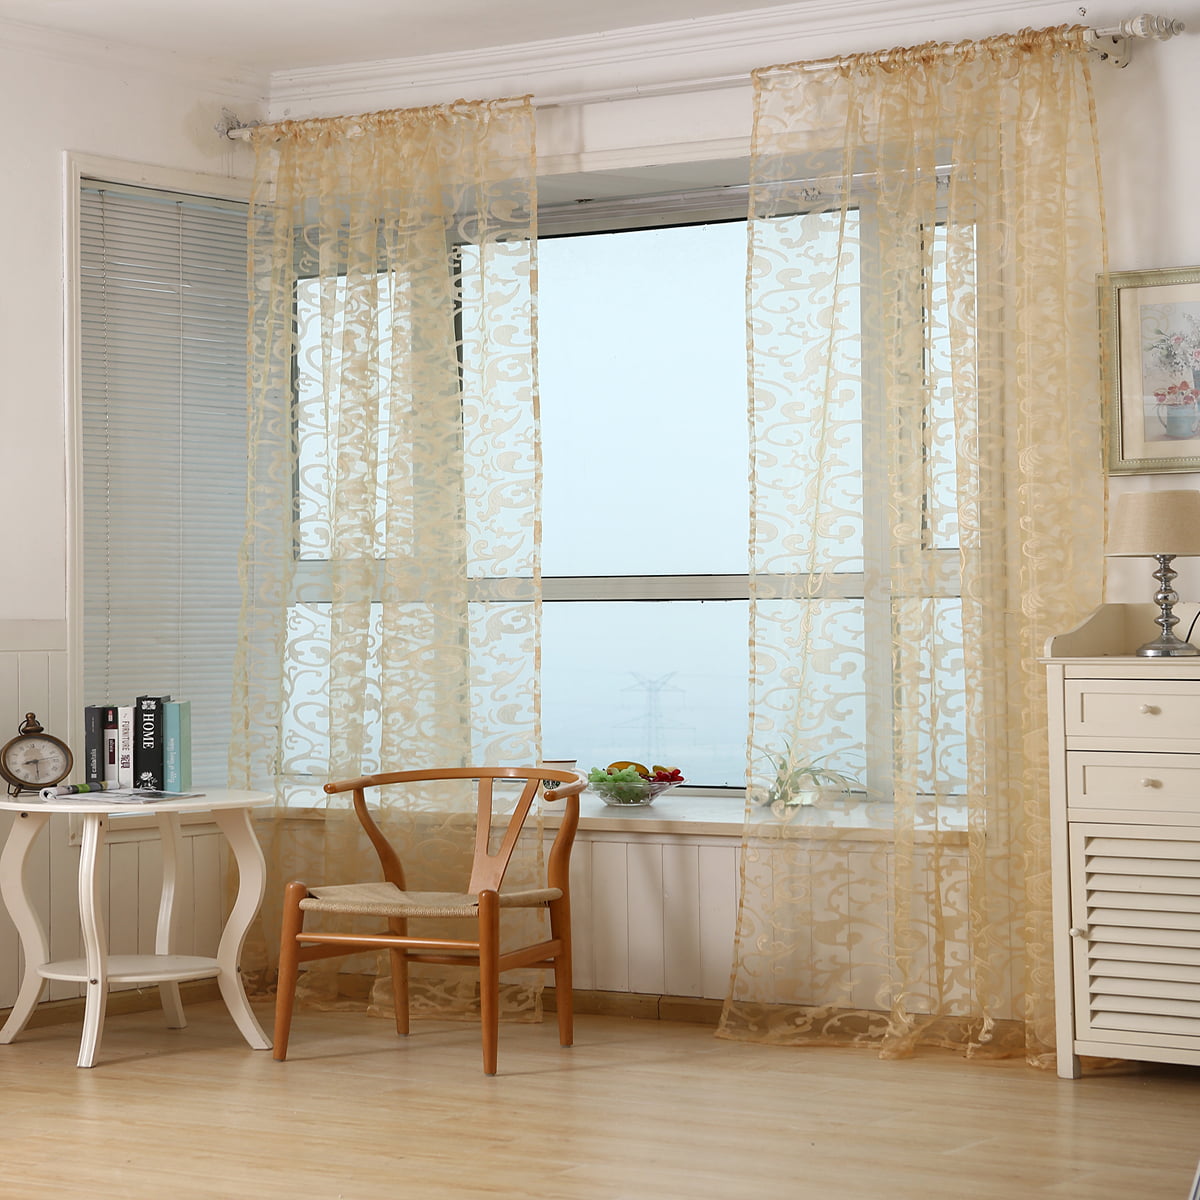 Room Divider Flower Sheer Voile Net Curtain Panel Header Top Window Curtain 1PC 